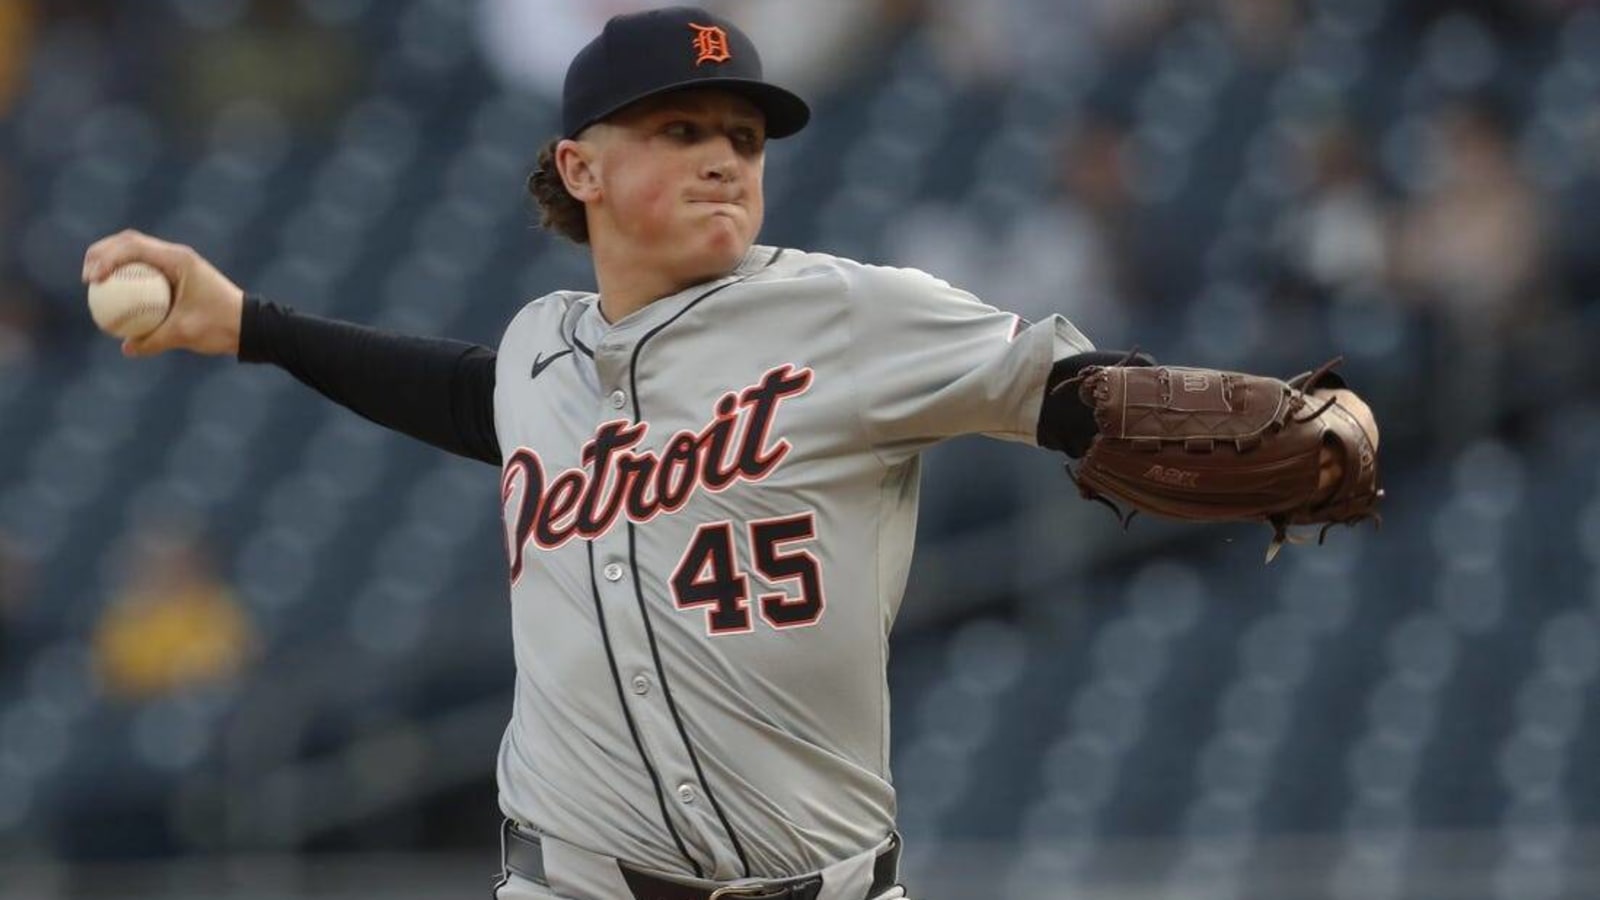 Tigers host Royals in rare Friday day start